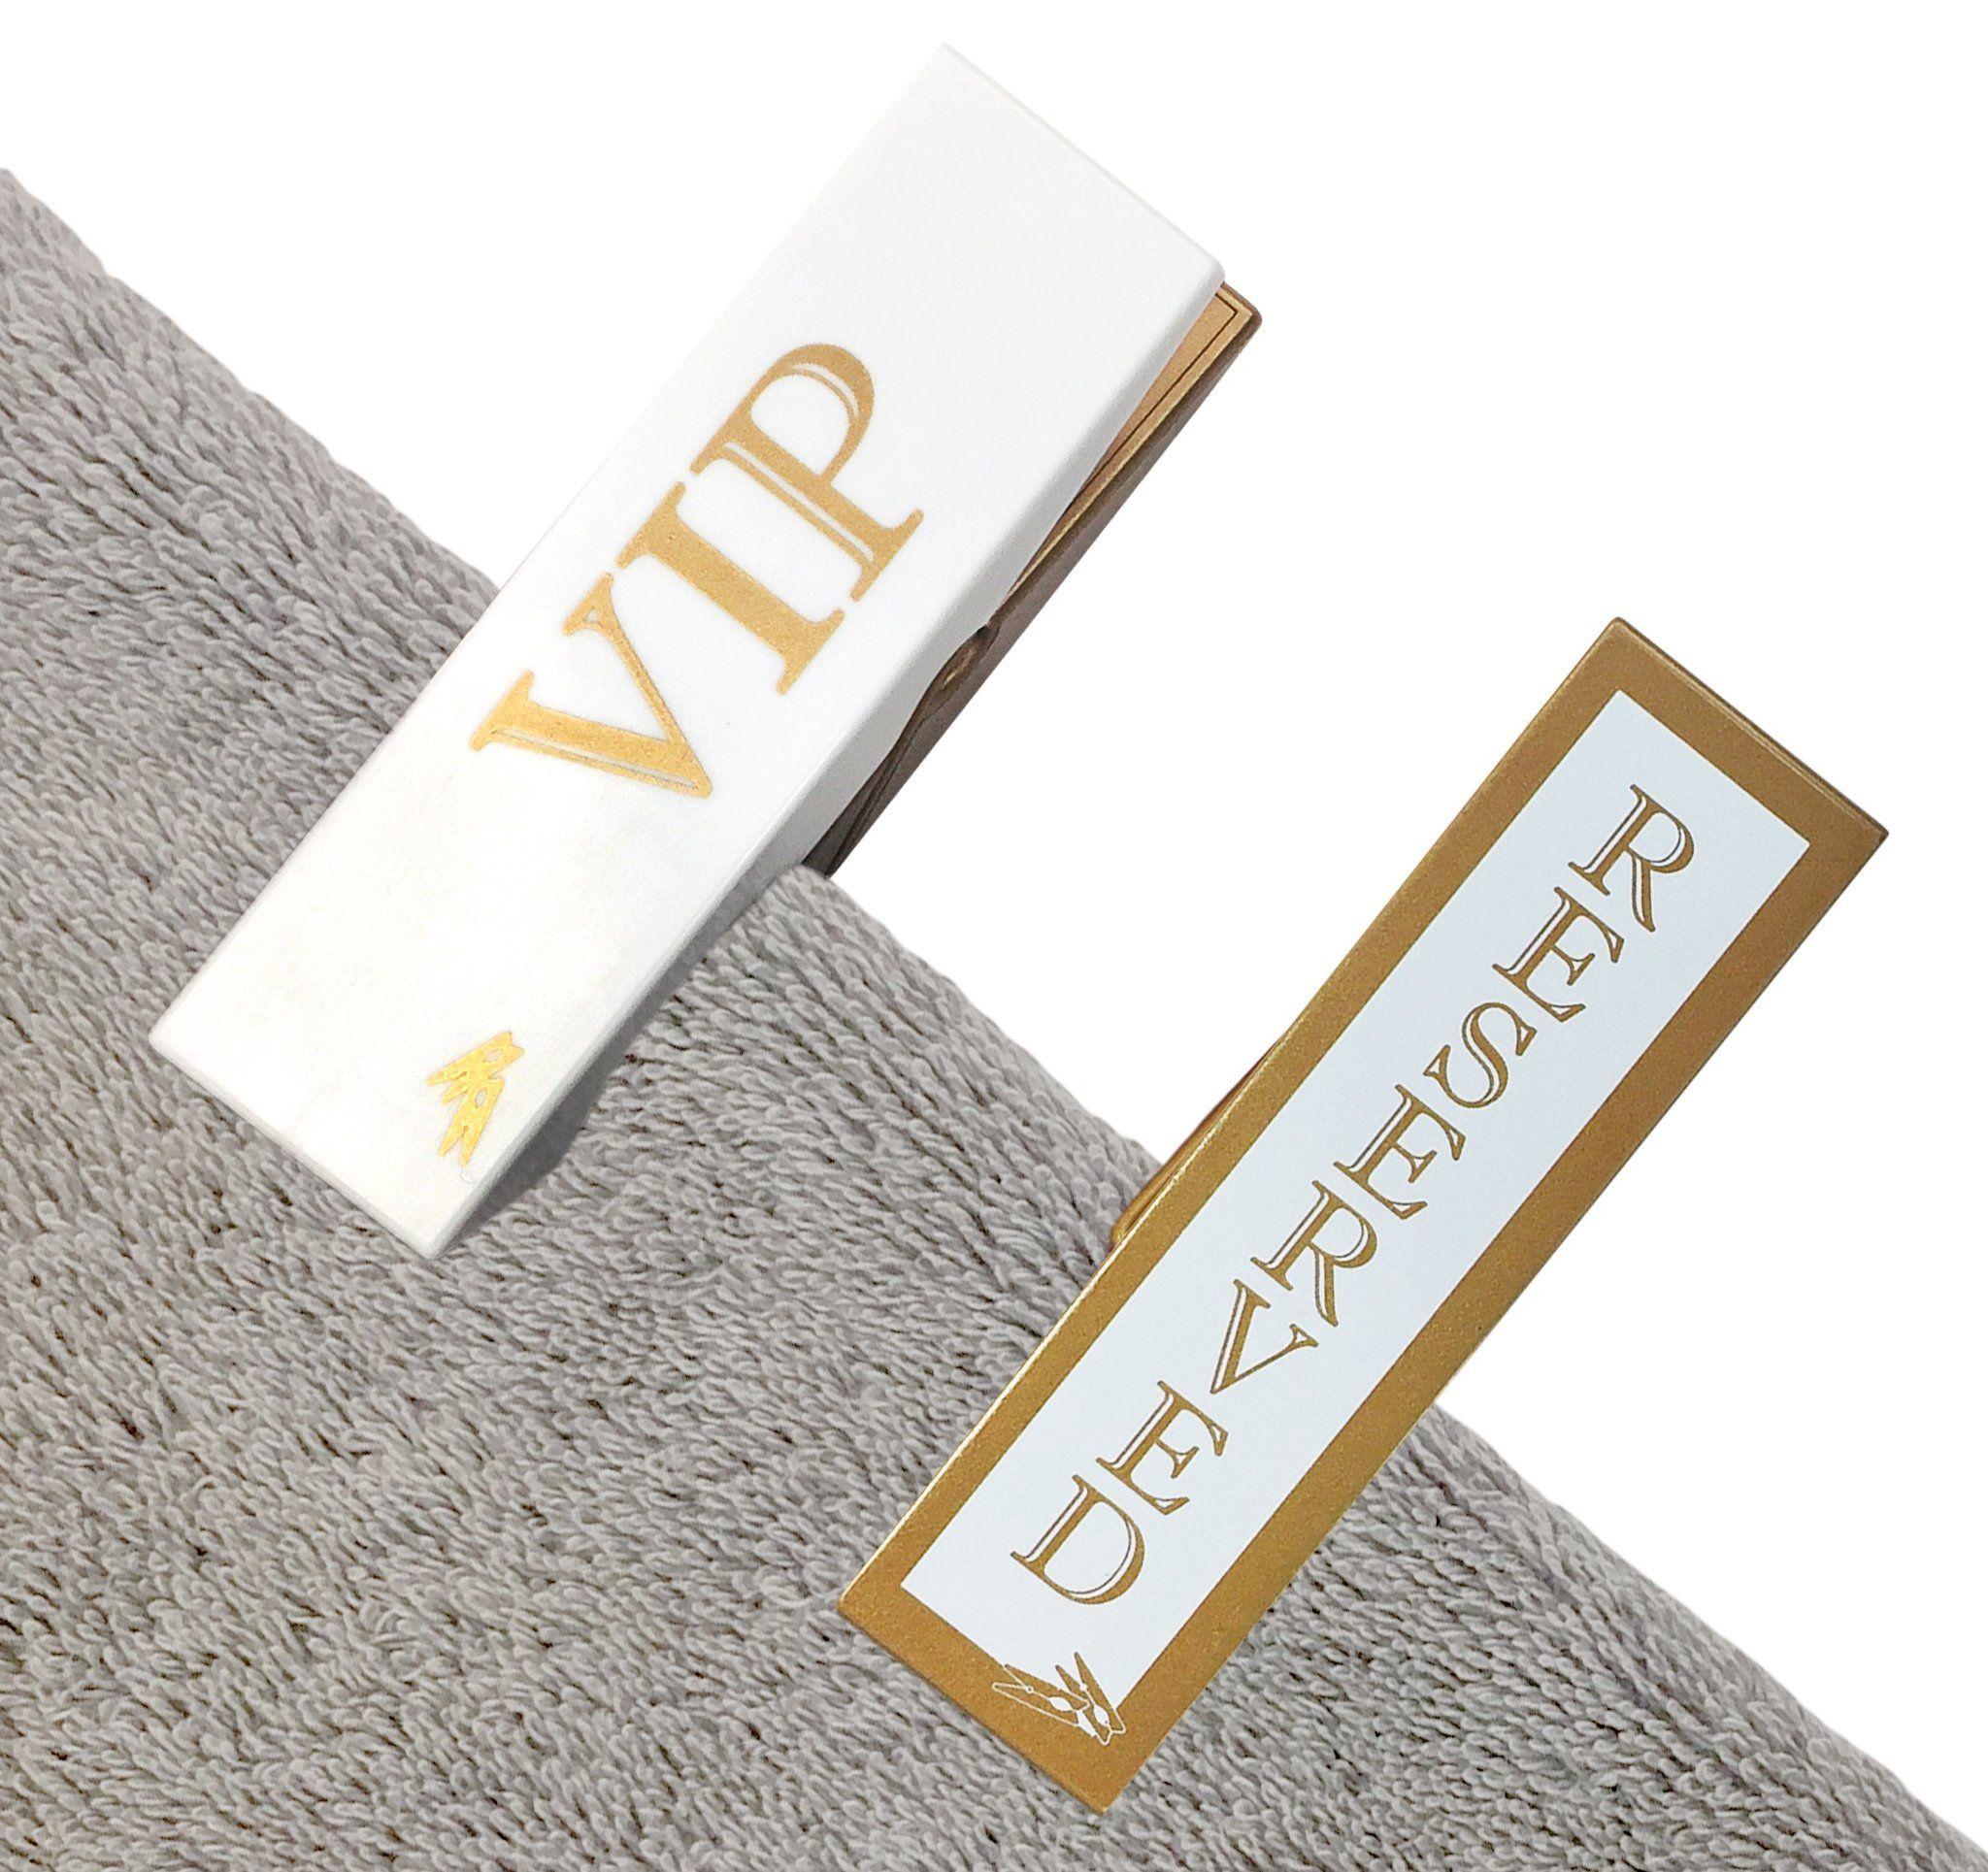 Reserved Clothes Logo - VIP Reserved Towel Clip